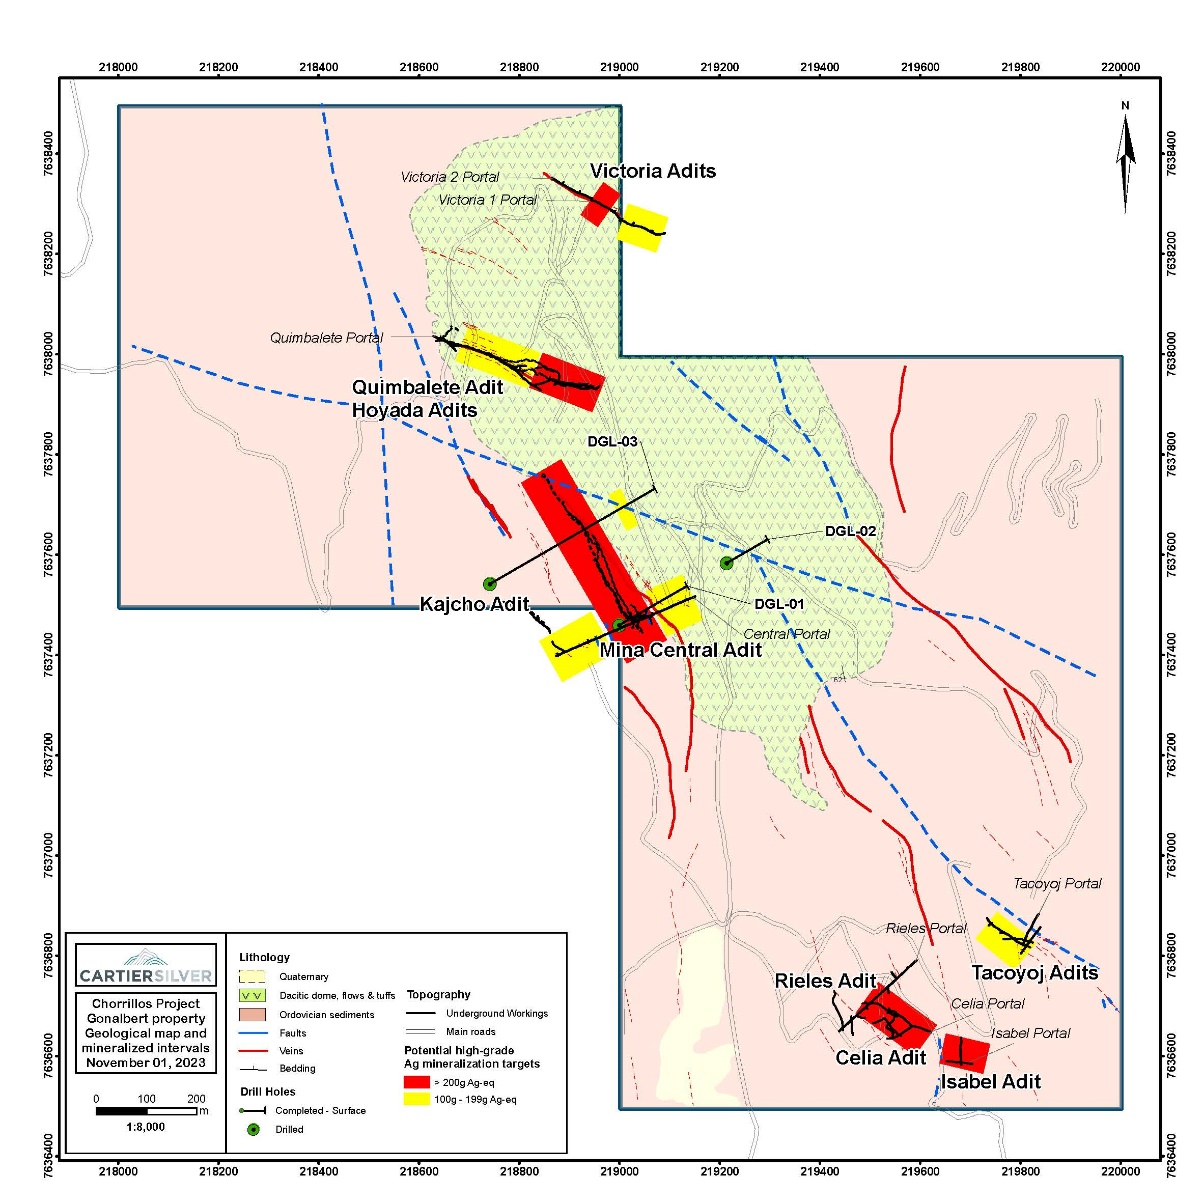 Geological plan map showing locations of principal underground workings sampling and the main potential high grade Ag mineralization targets as indicated by results of channel sampling of underground workings.